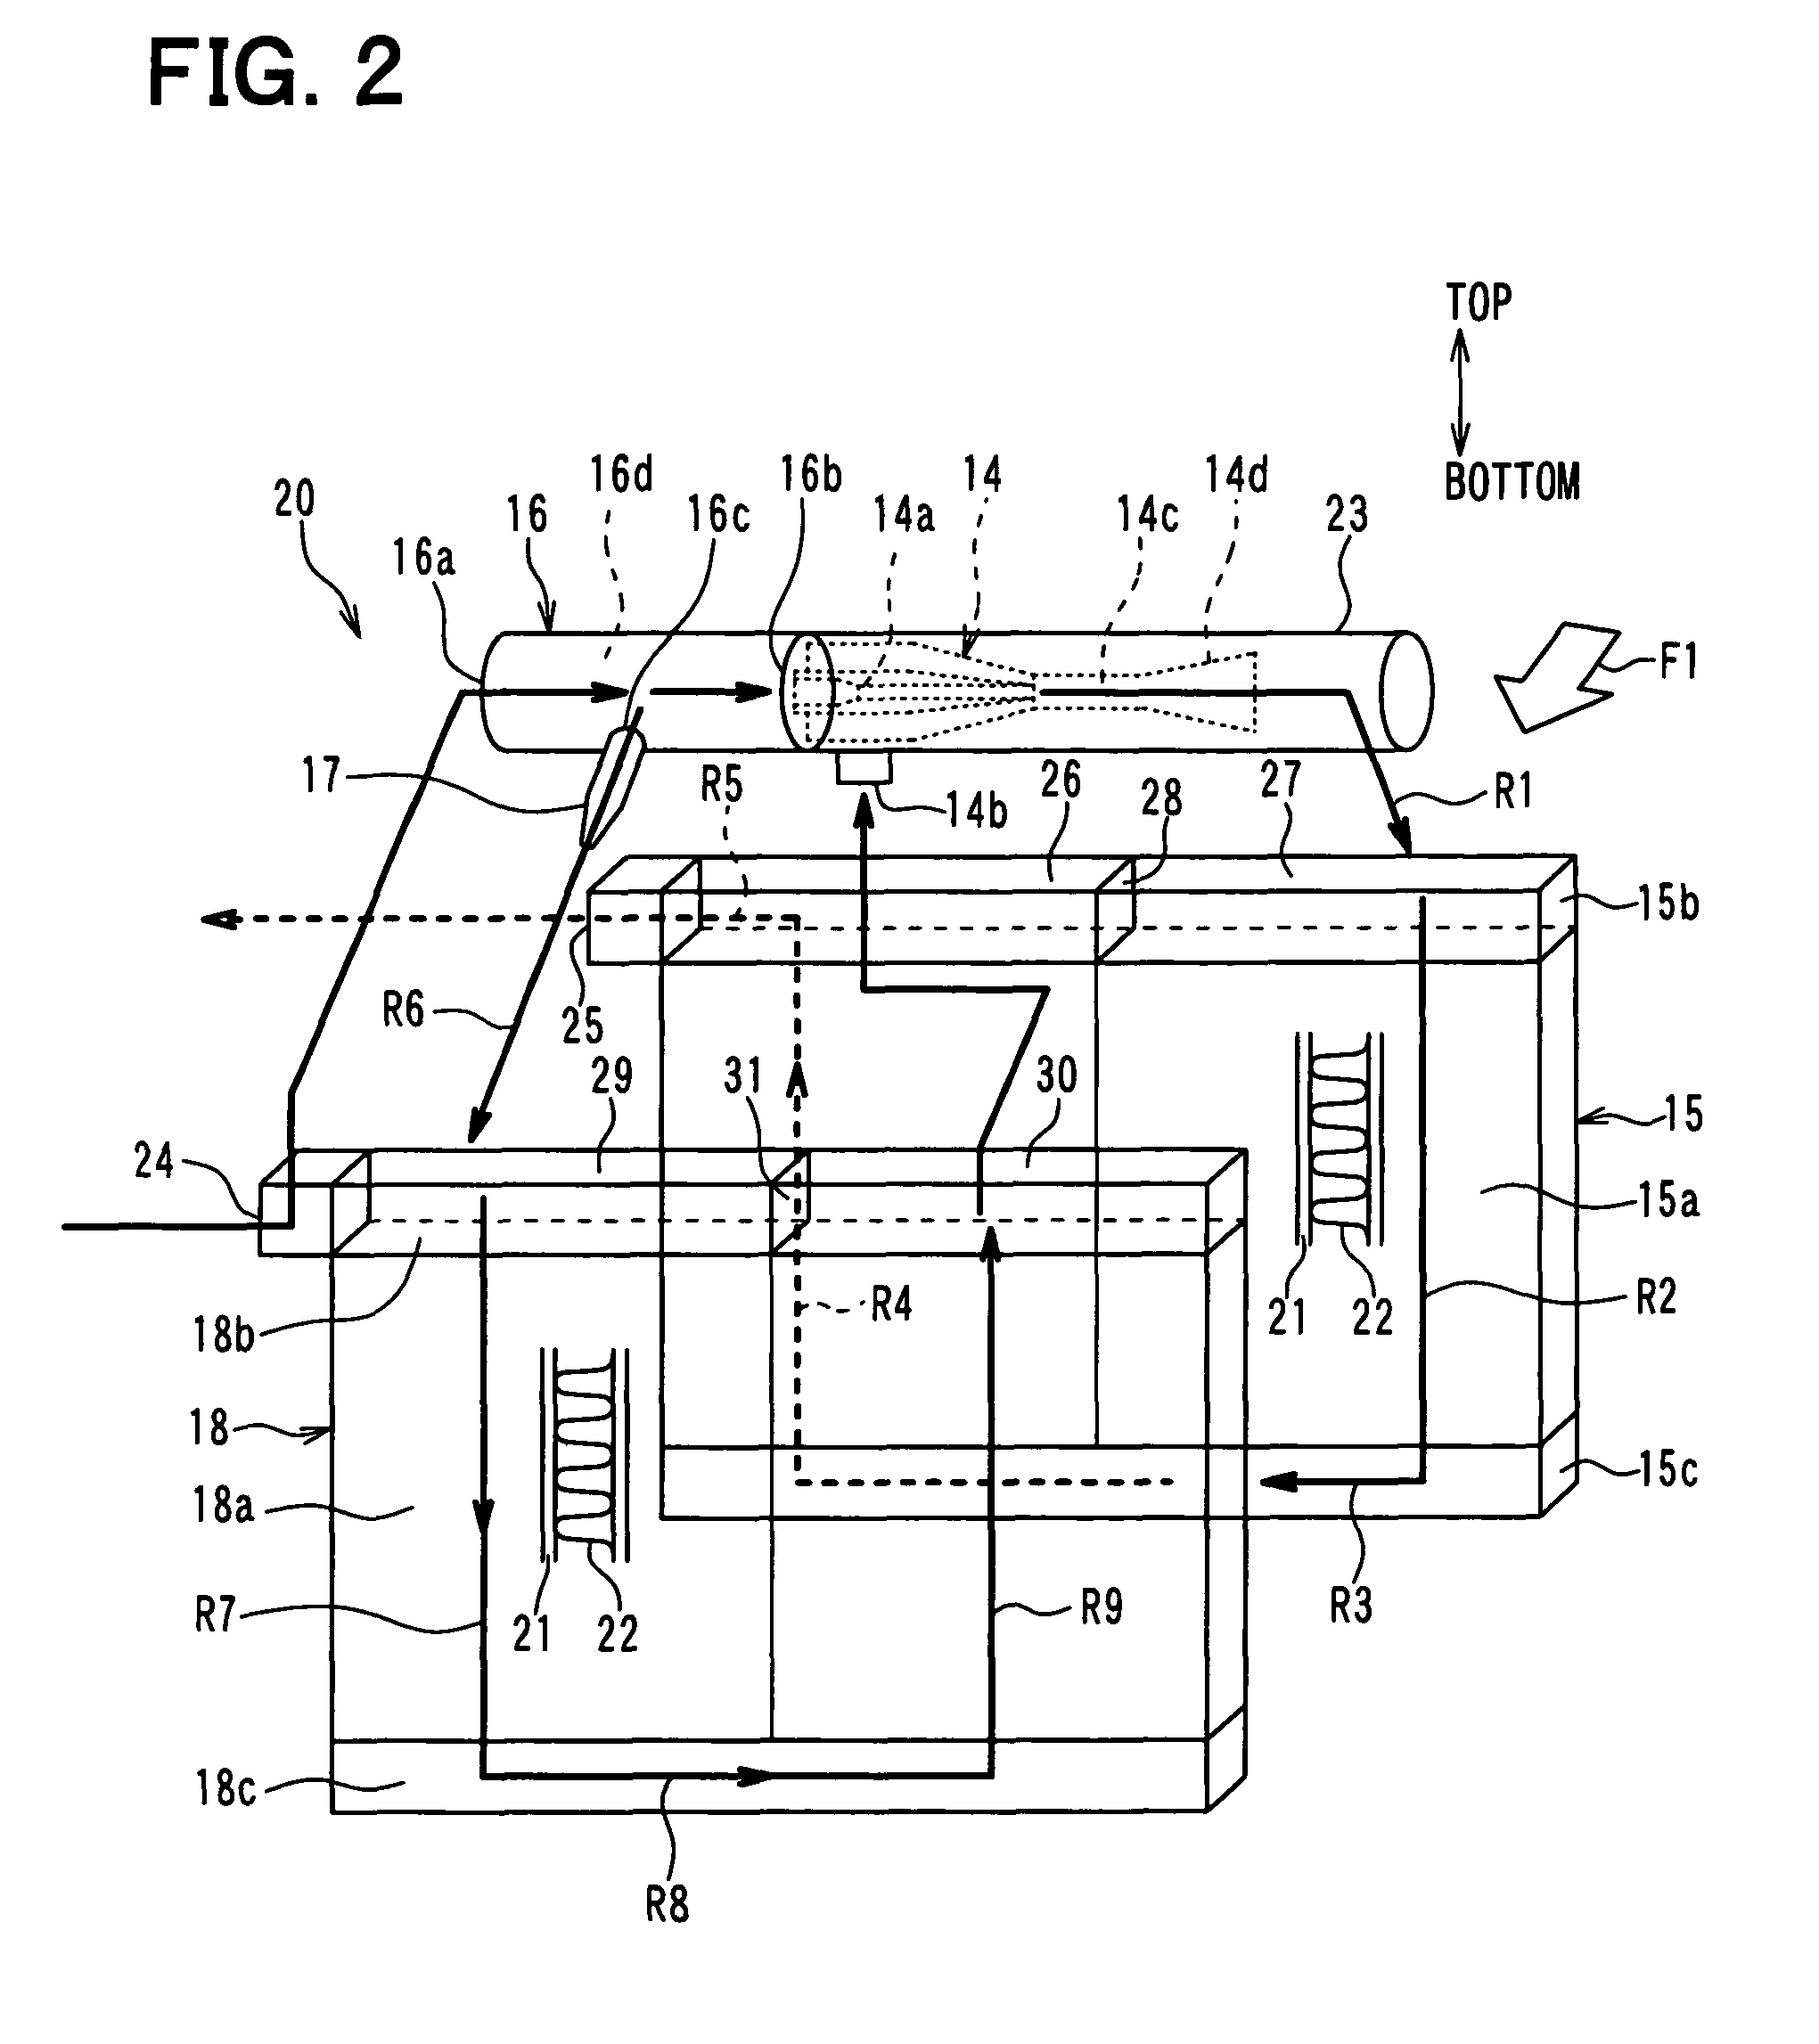 Dual evaporator unit with integrated ejector having refrigerant flow adjustability